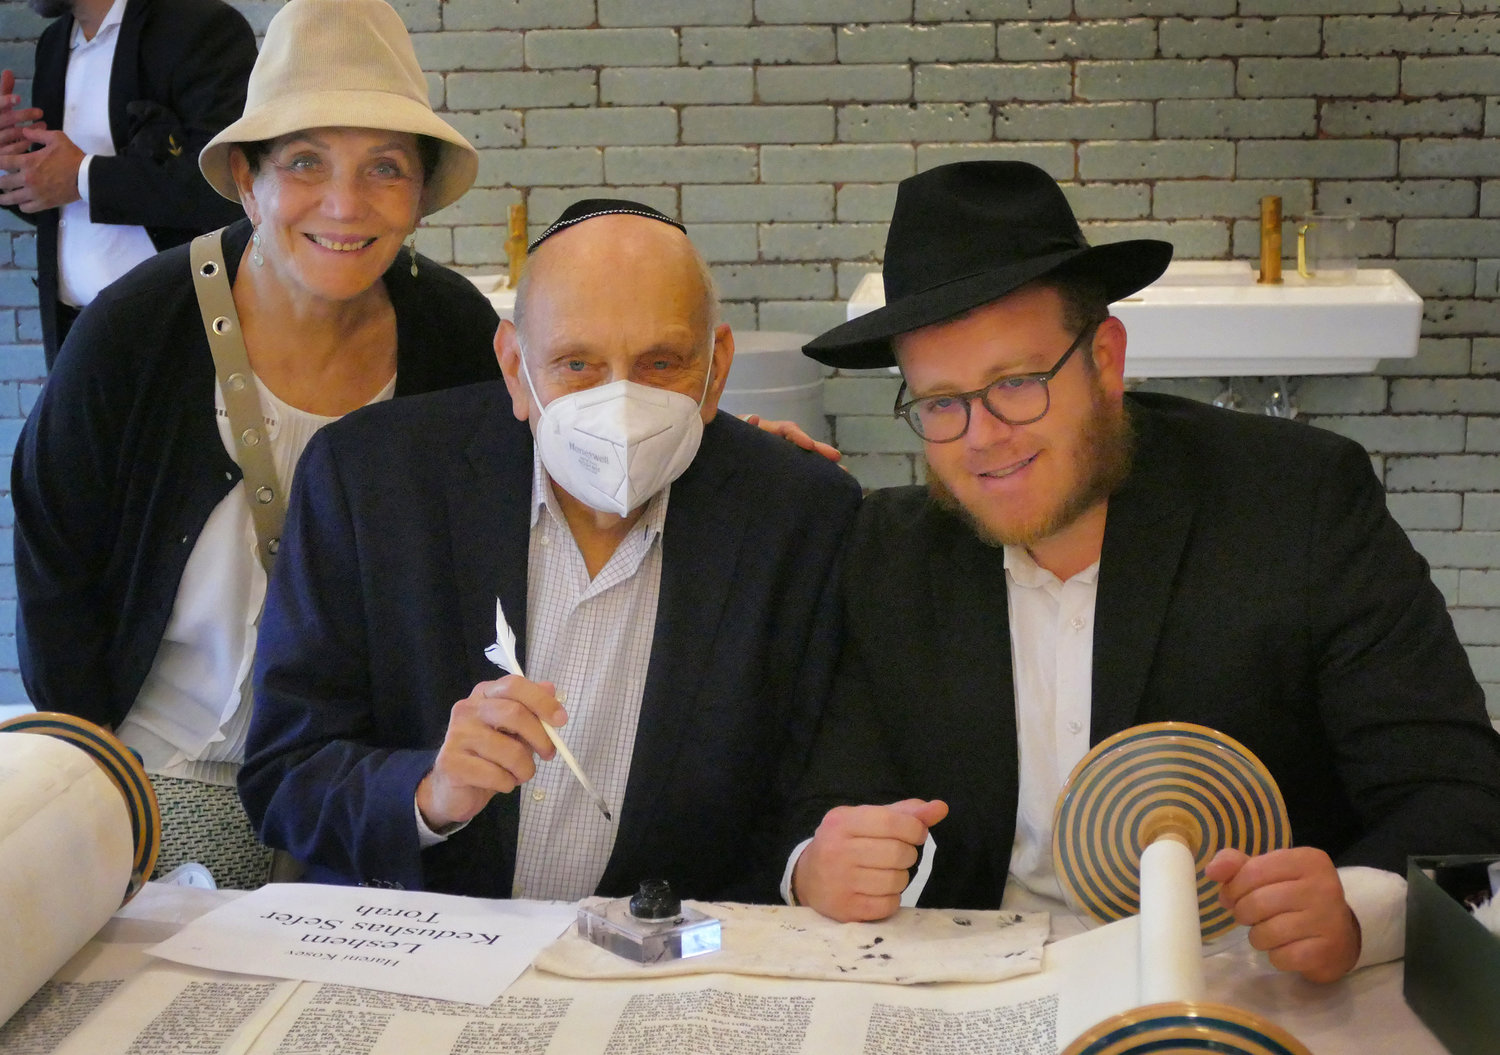 Elaine and Norm Brodsky, who made a donation to acquire a second torah, looked over the holy scroll with Assistant Rabbi Yechiel Winfeld.